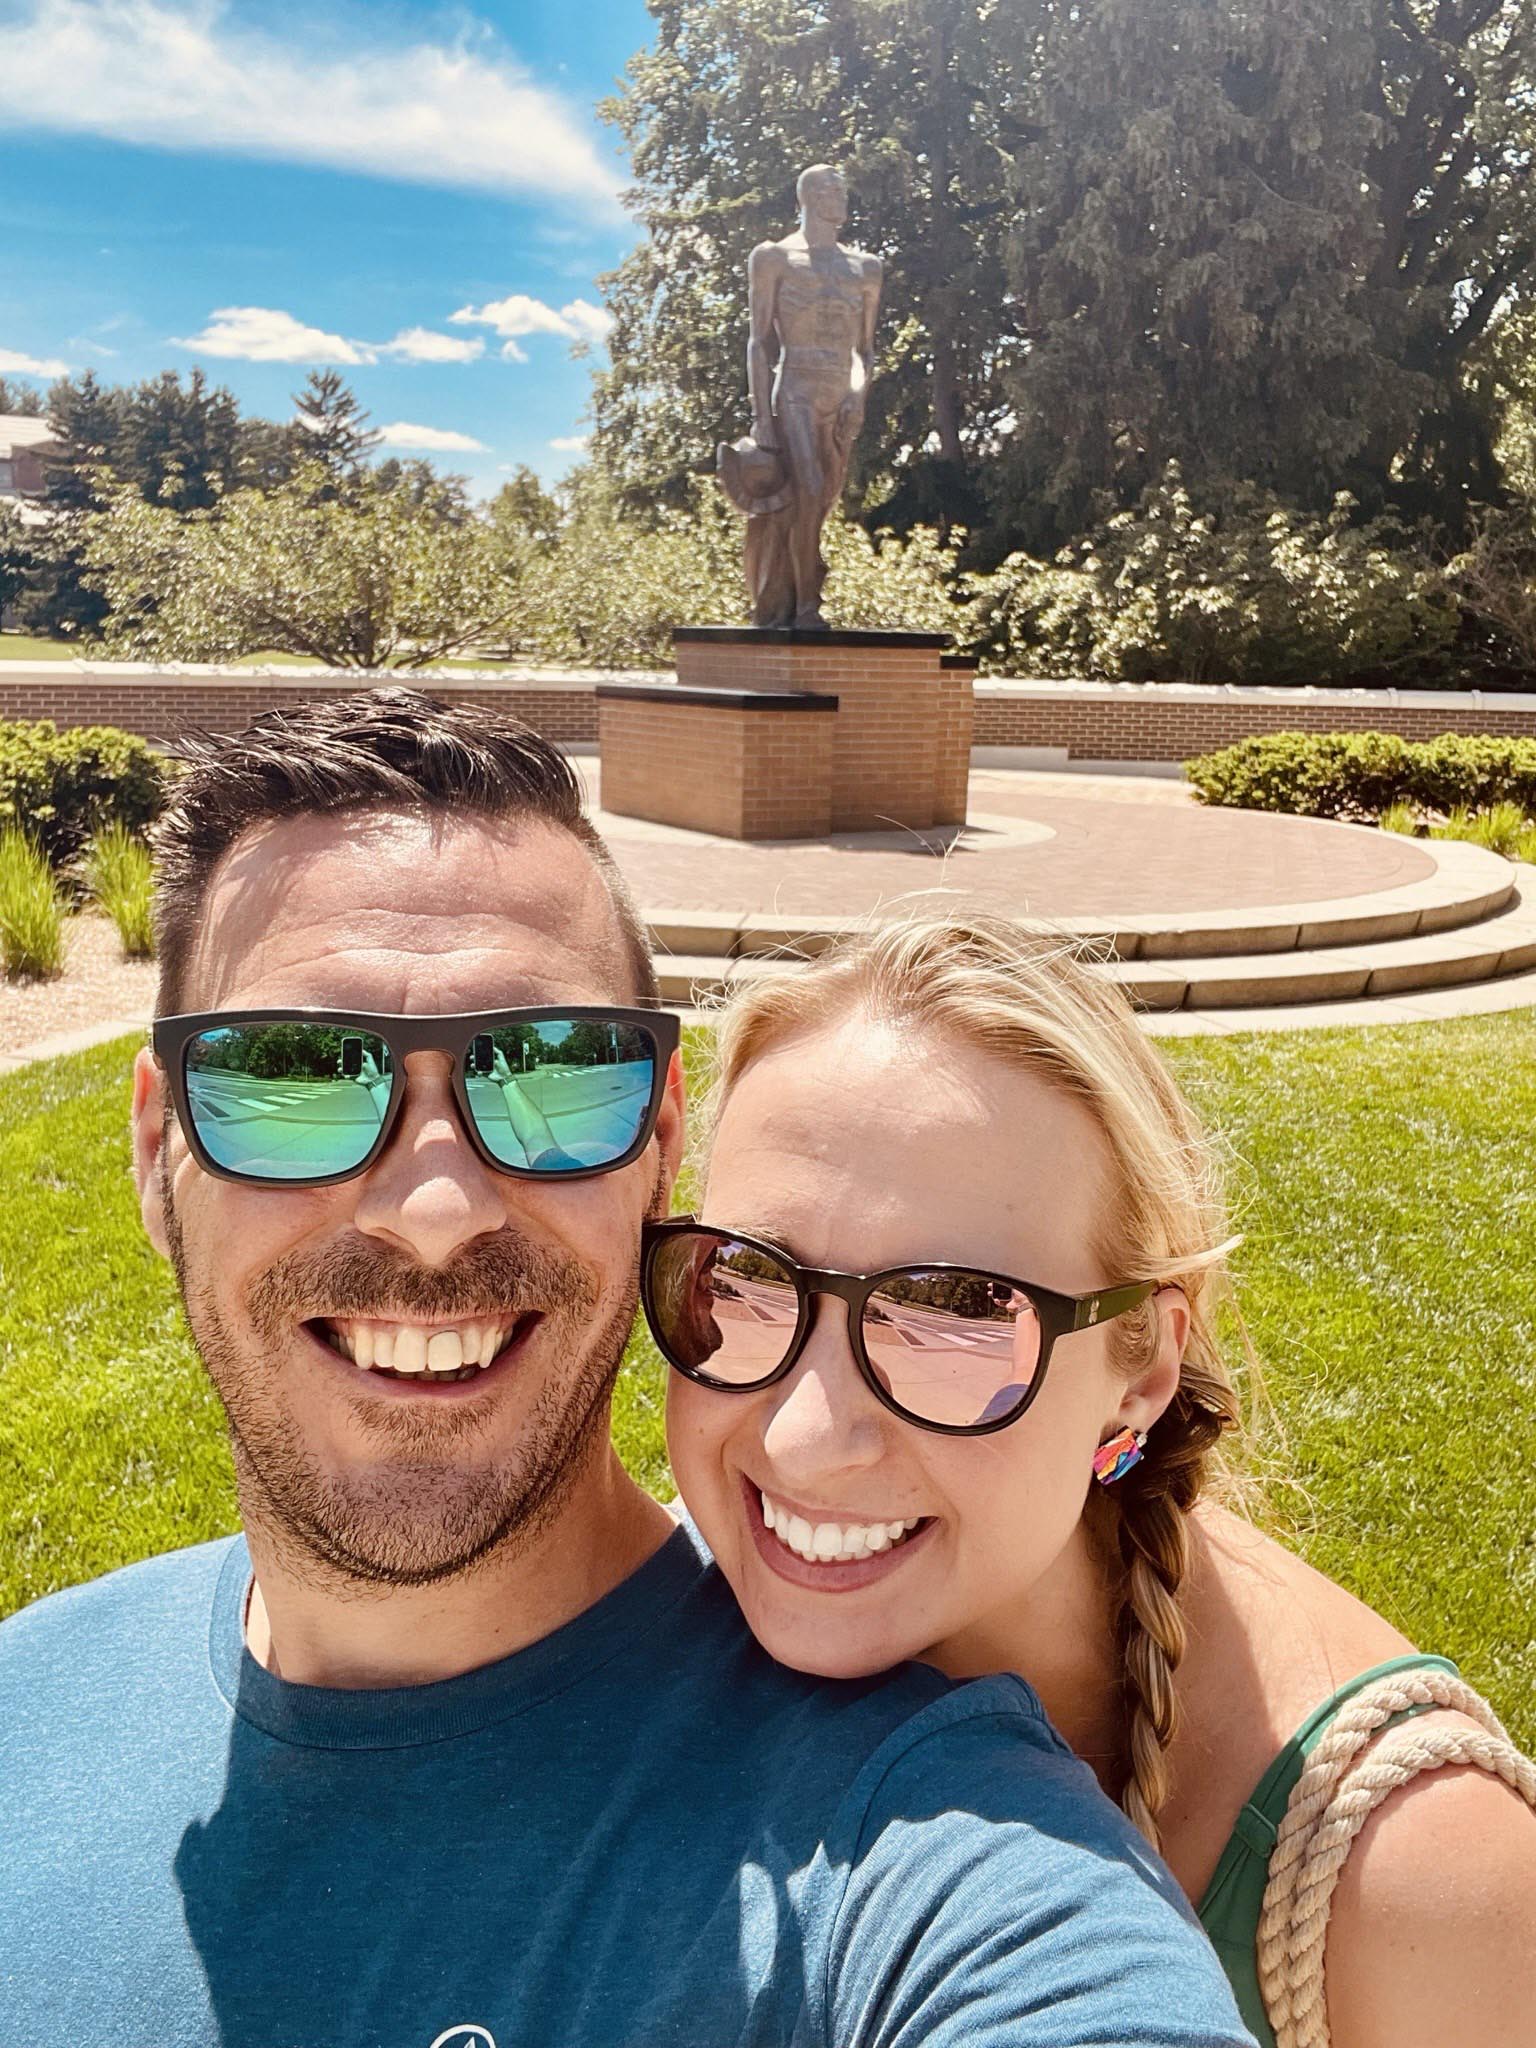 Selfie of Lisa Danno and her partner in front of the Spartan Statue